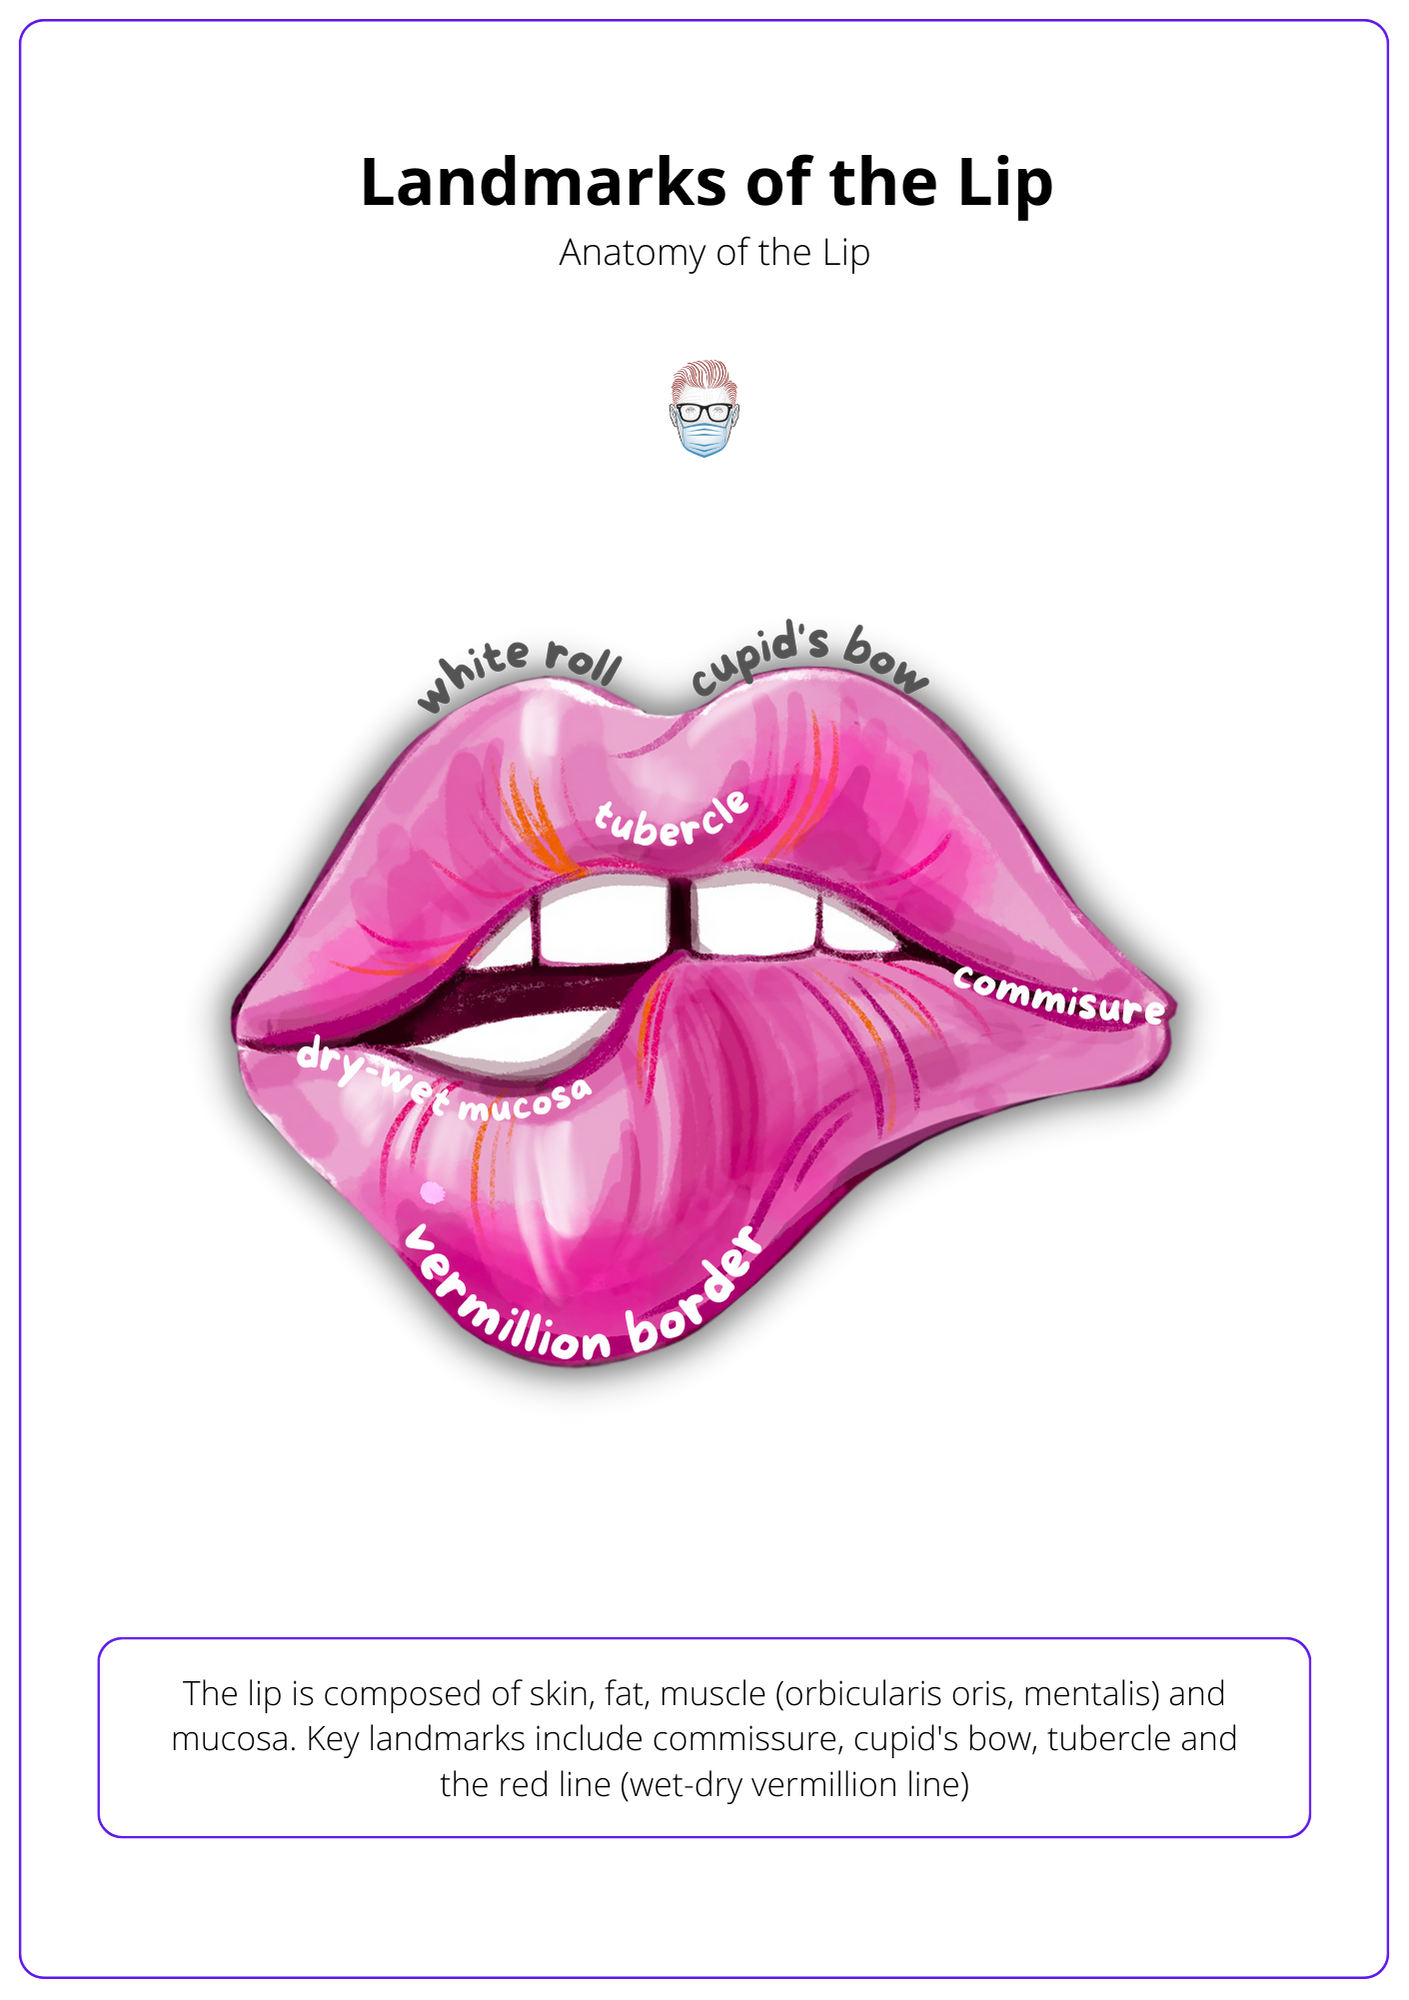 A labelled diagram of a lip showing cupids bow, white roll, mucosa, vermillion border